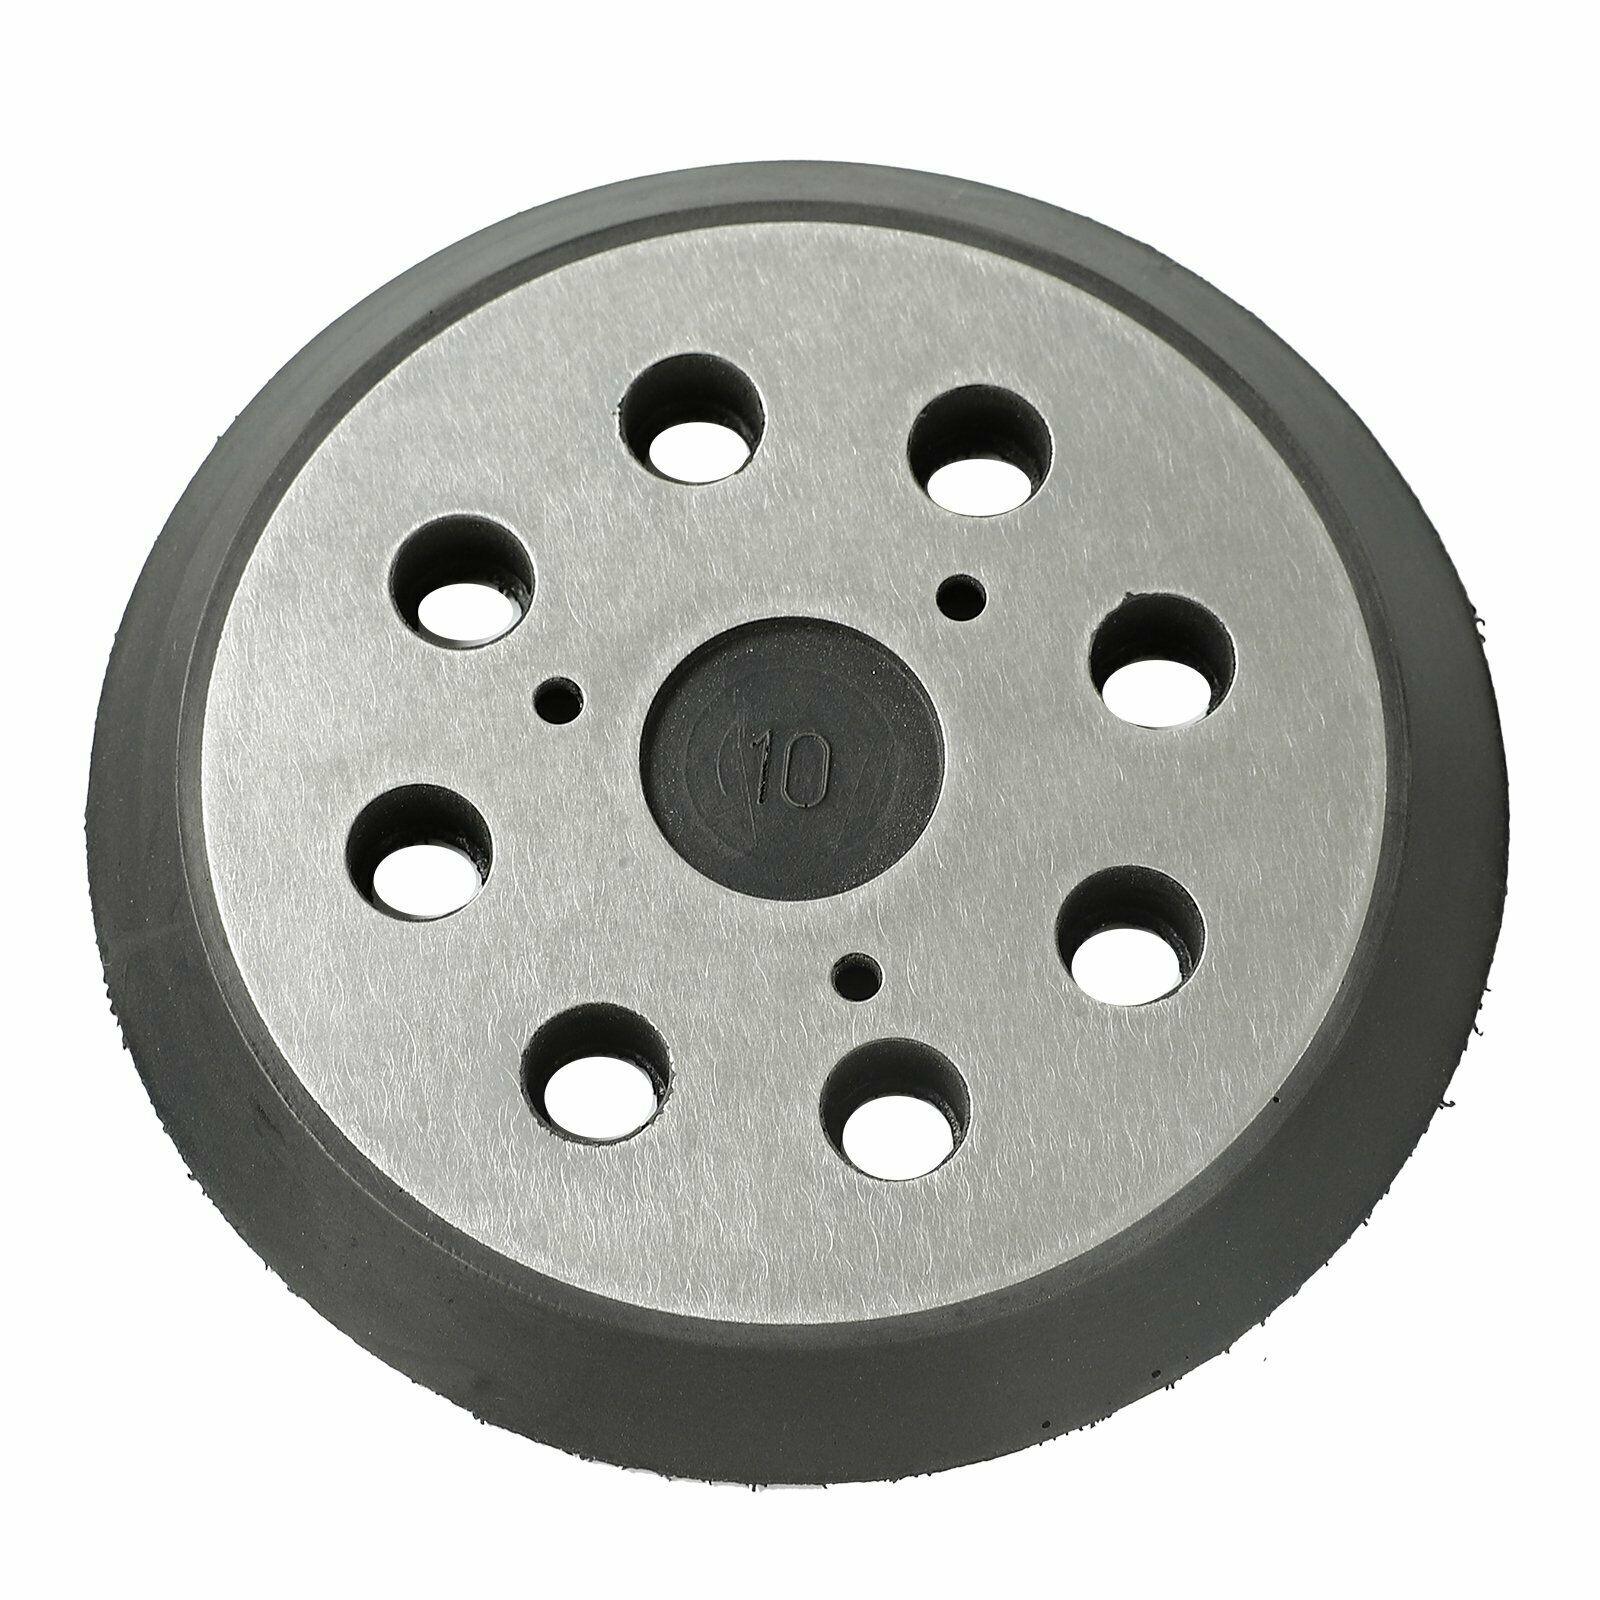 151281-08 5 In. 8 Hole Hook And Loop Replacement Pad For DeWalt